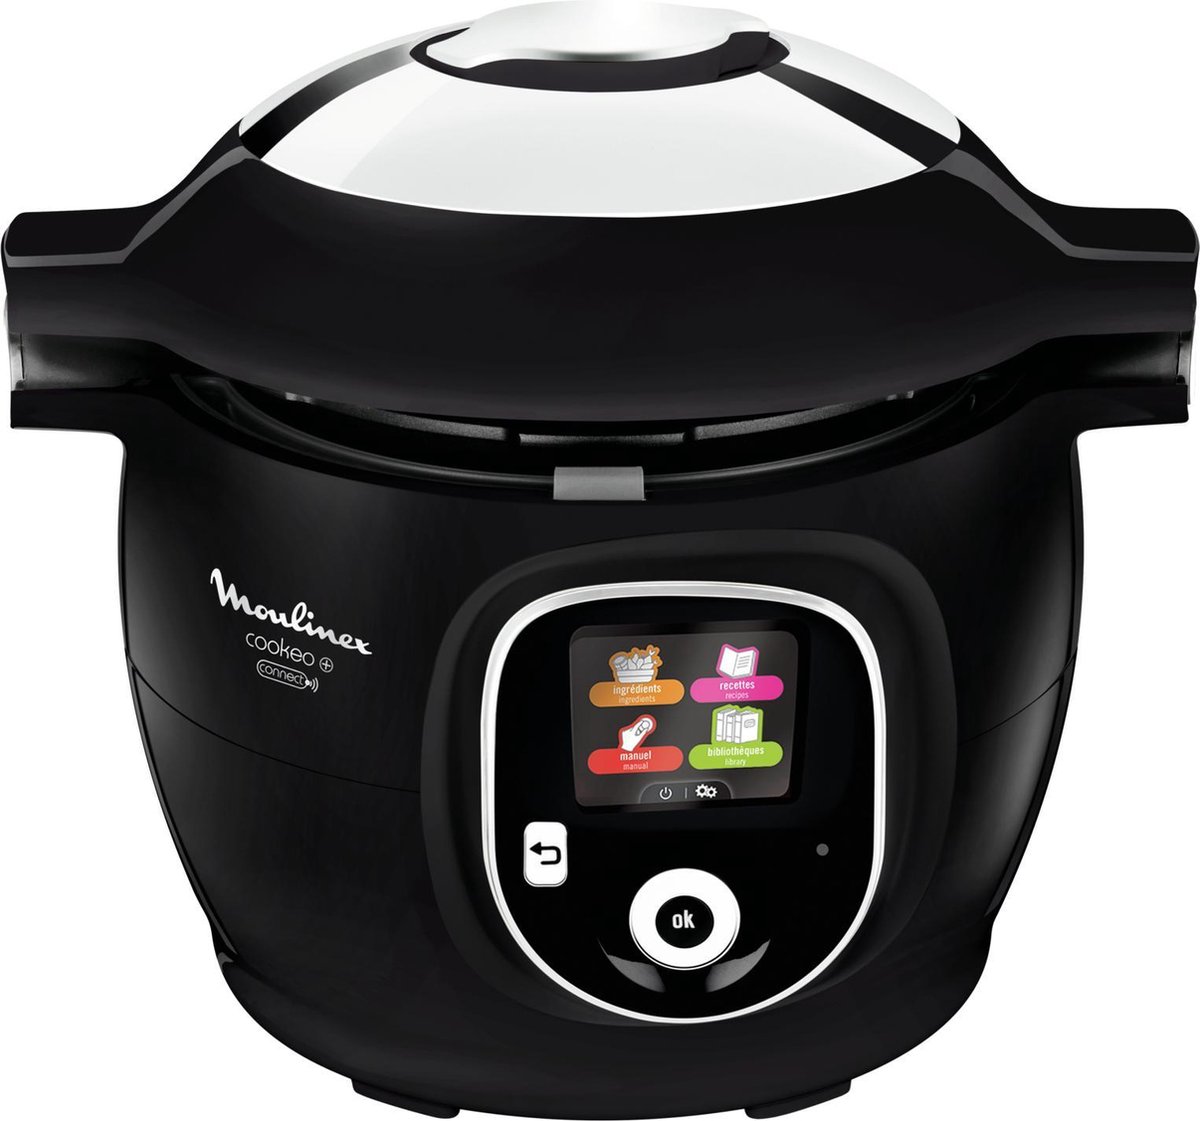 Moulinex Cookeo CE859800 specifications